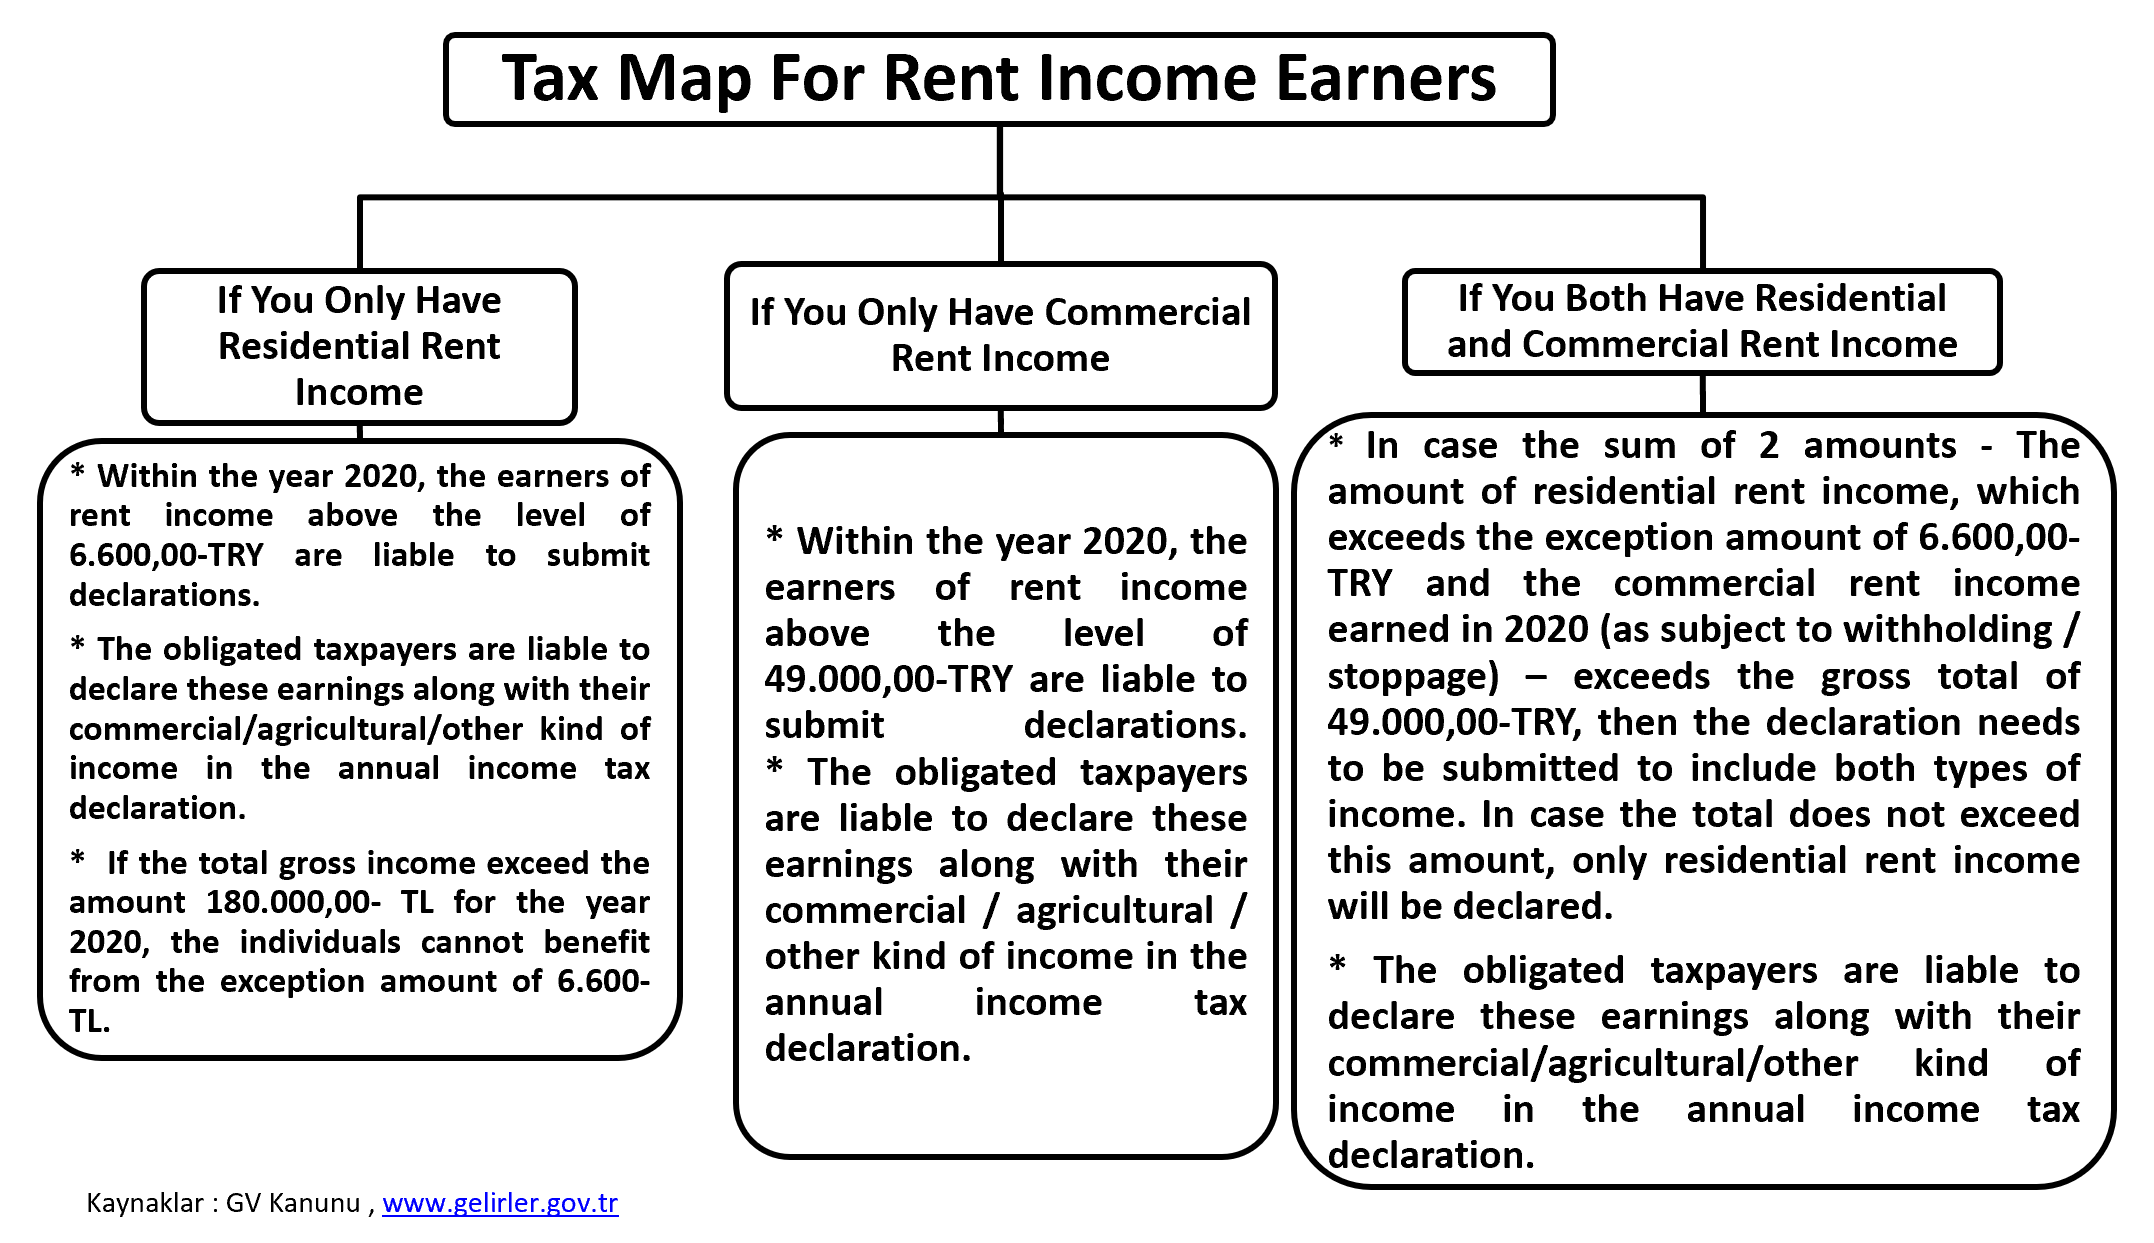 Tax Map For Rent Income Earners 2021